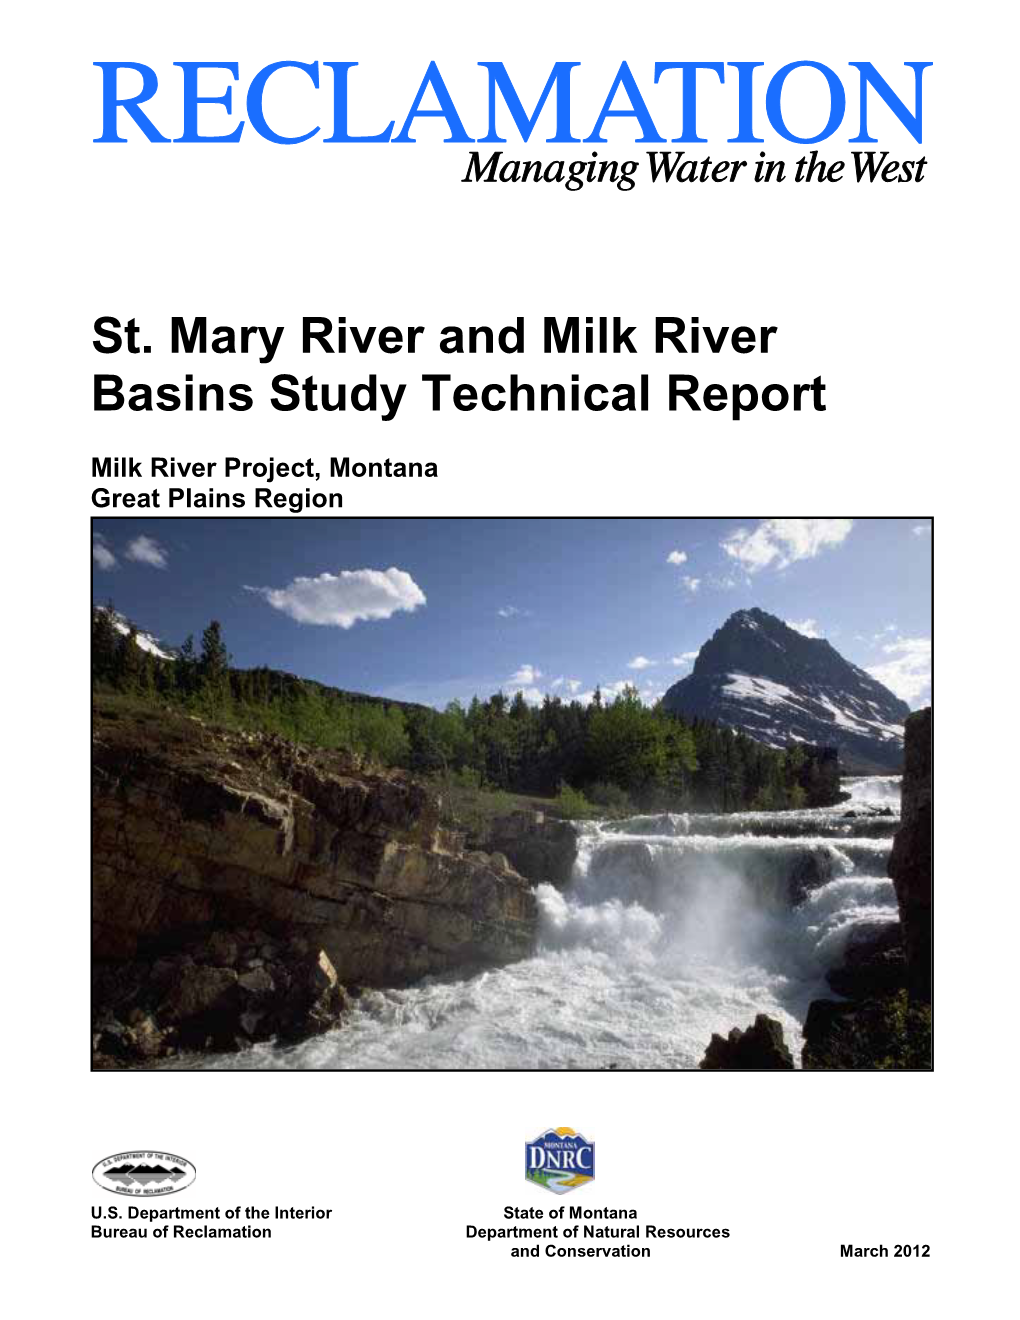 St. Mary River and Milk River Basins Study Technical Report